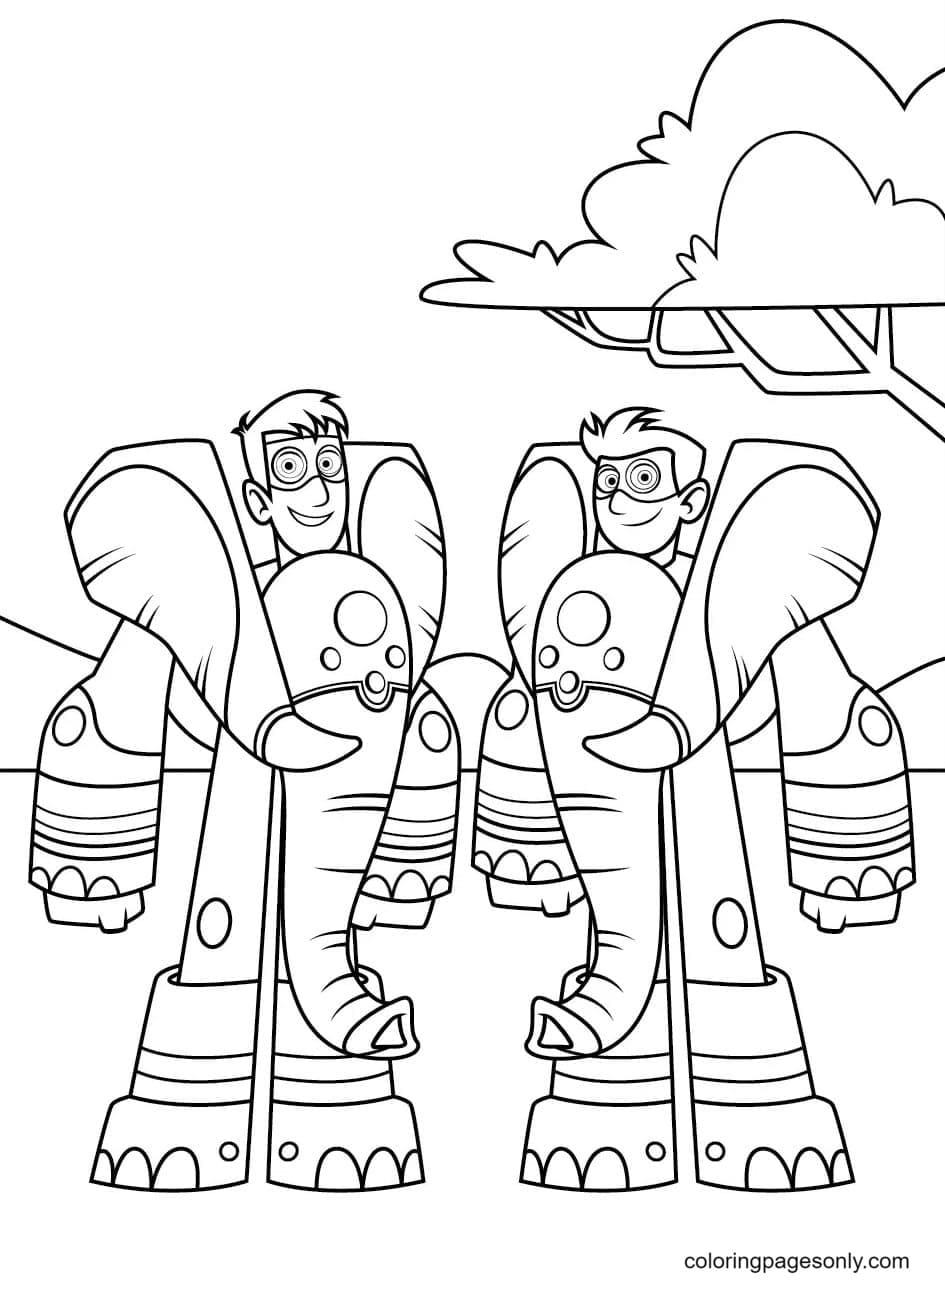 Chris and Martin transformed into elephants with Creature Power Suits Coloring Page